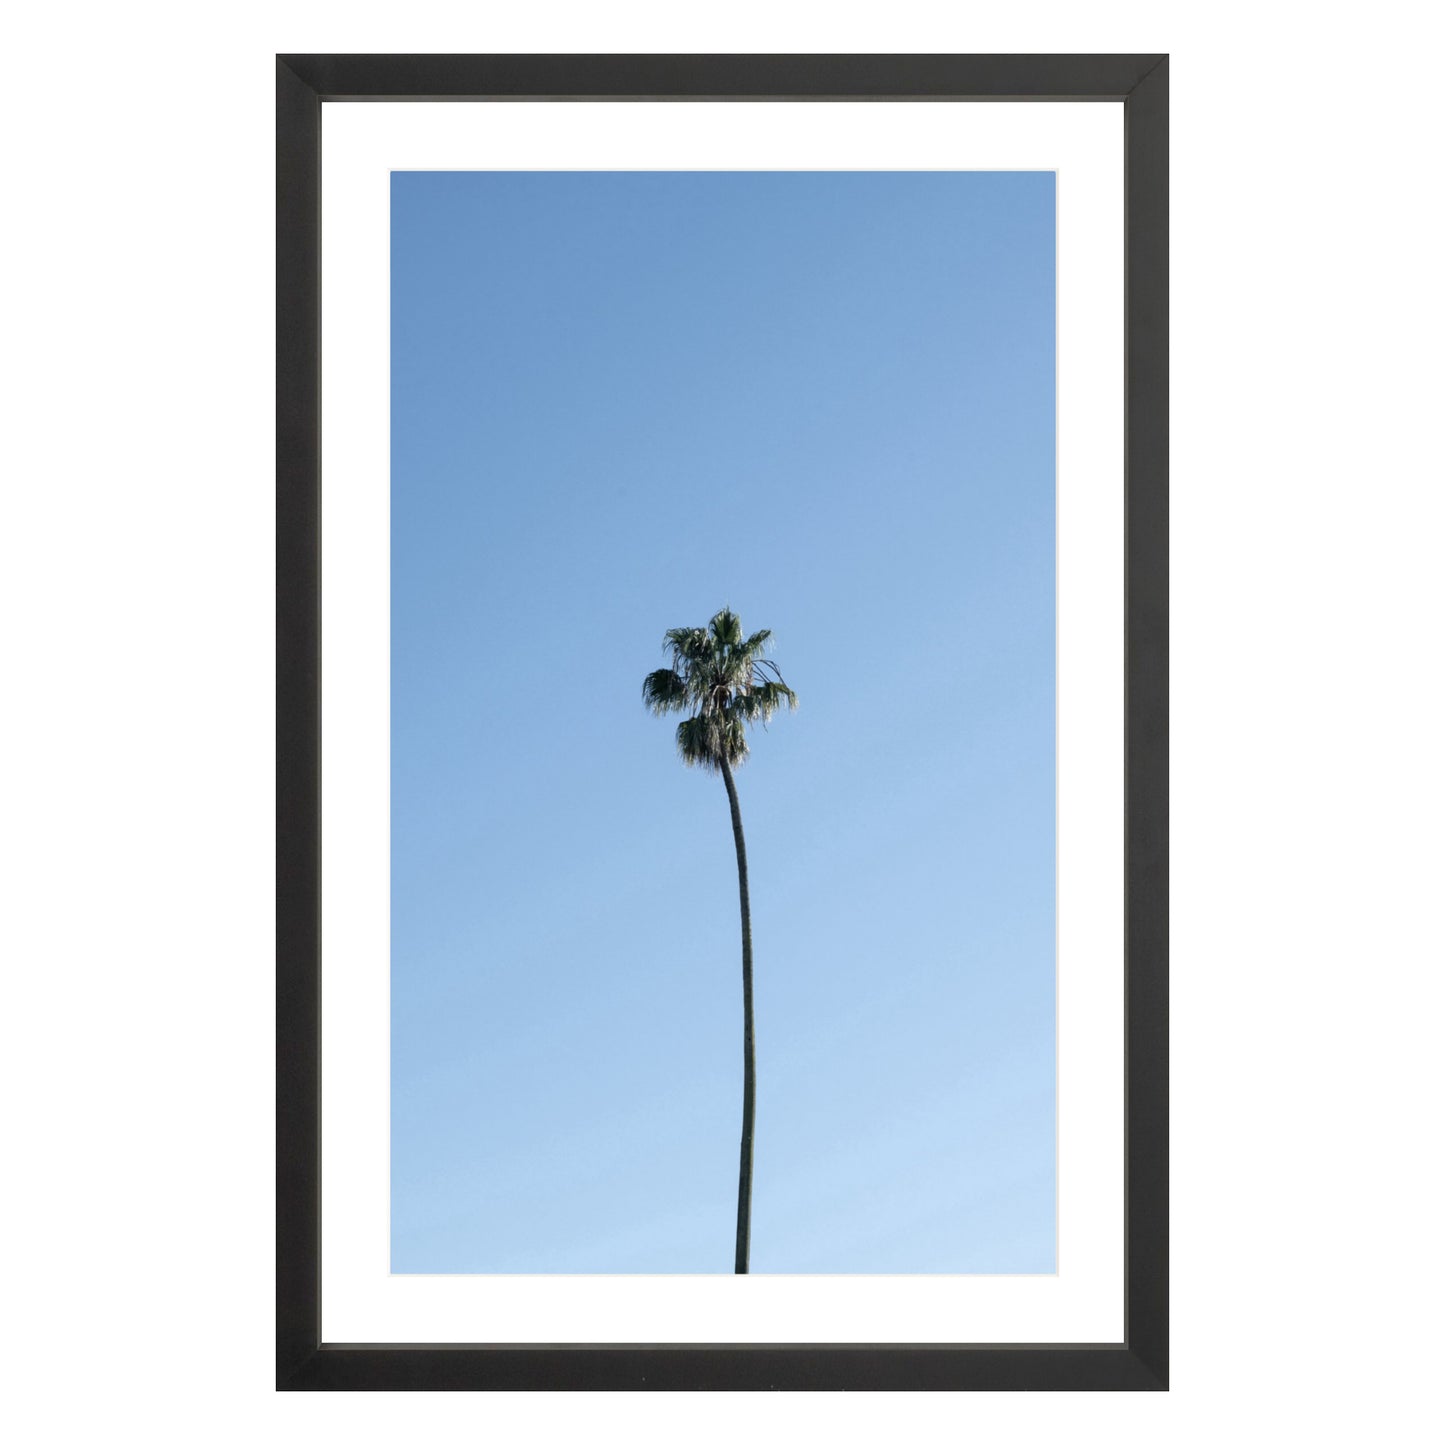 Photograph of single palm tree in front of blue sky in black frame with white mat